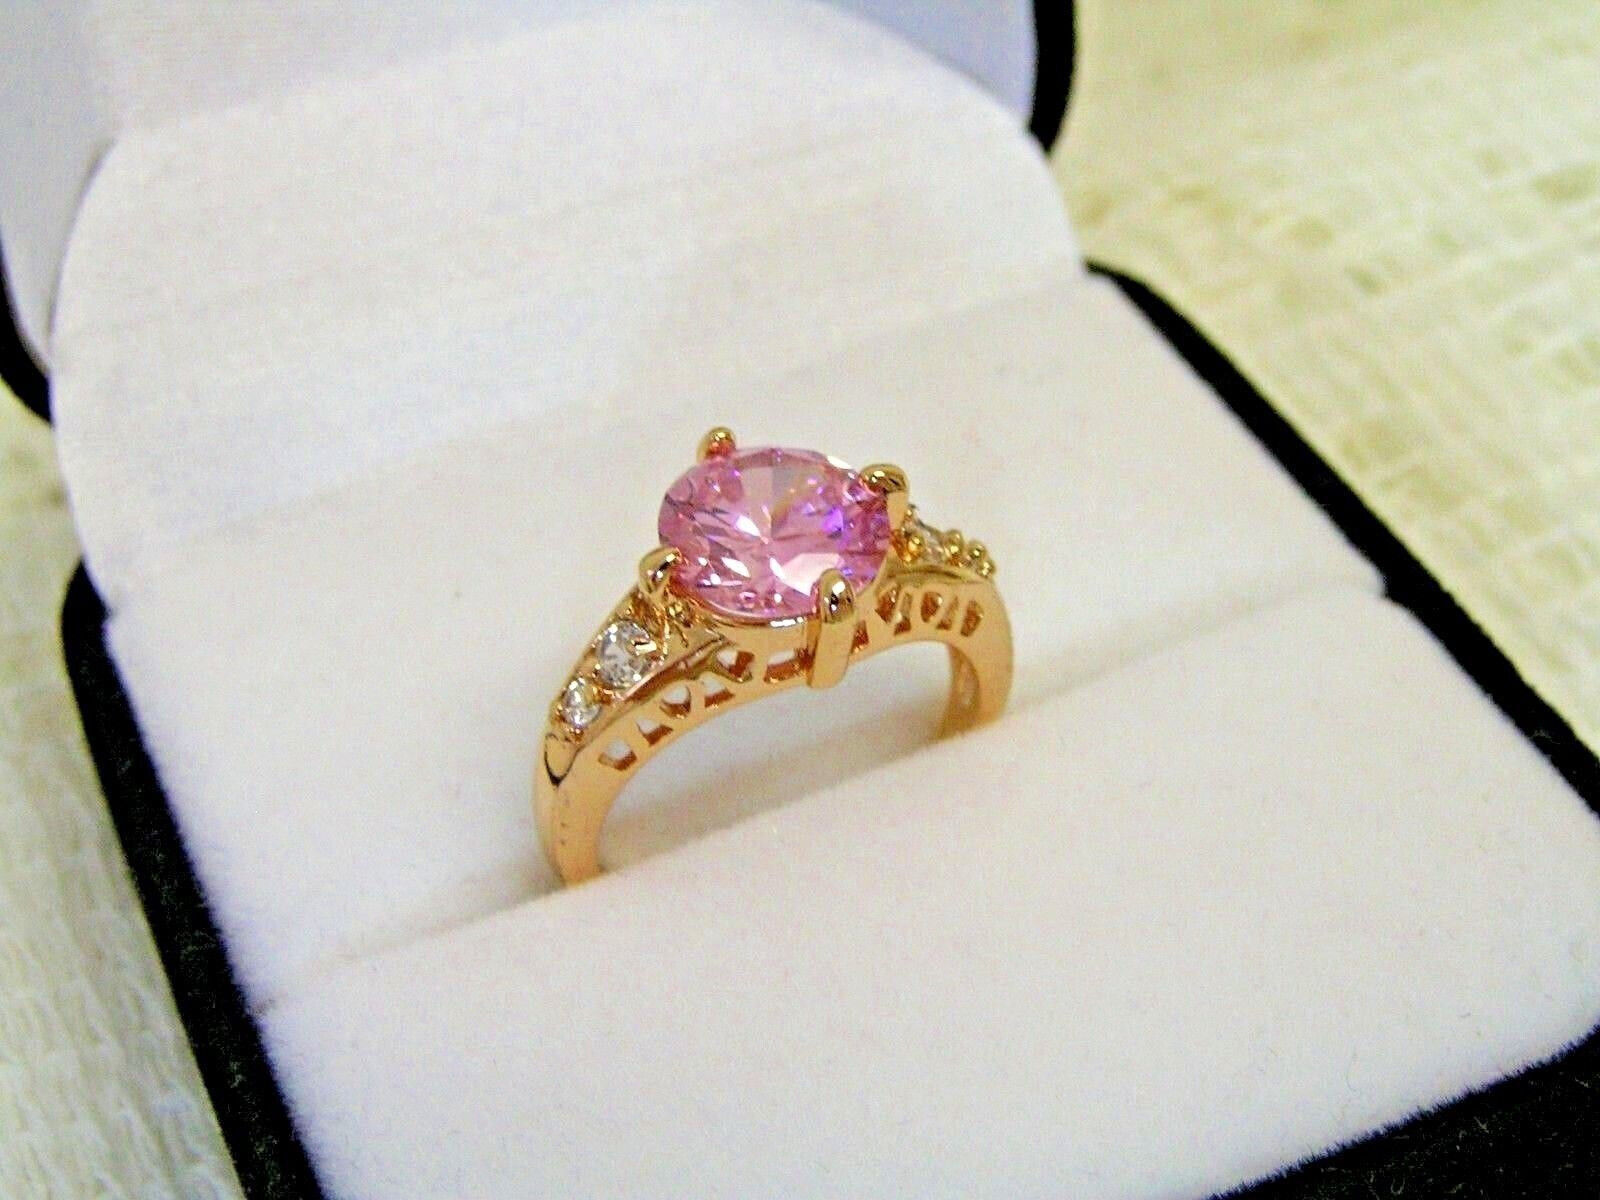 Ahoy: Sapphire (Pink) ring Size 5.25, White Sapphire, 10K yel gold plating #2093